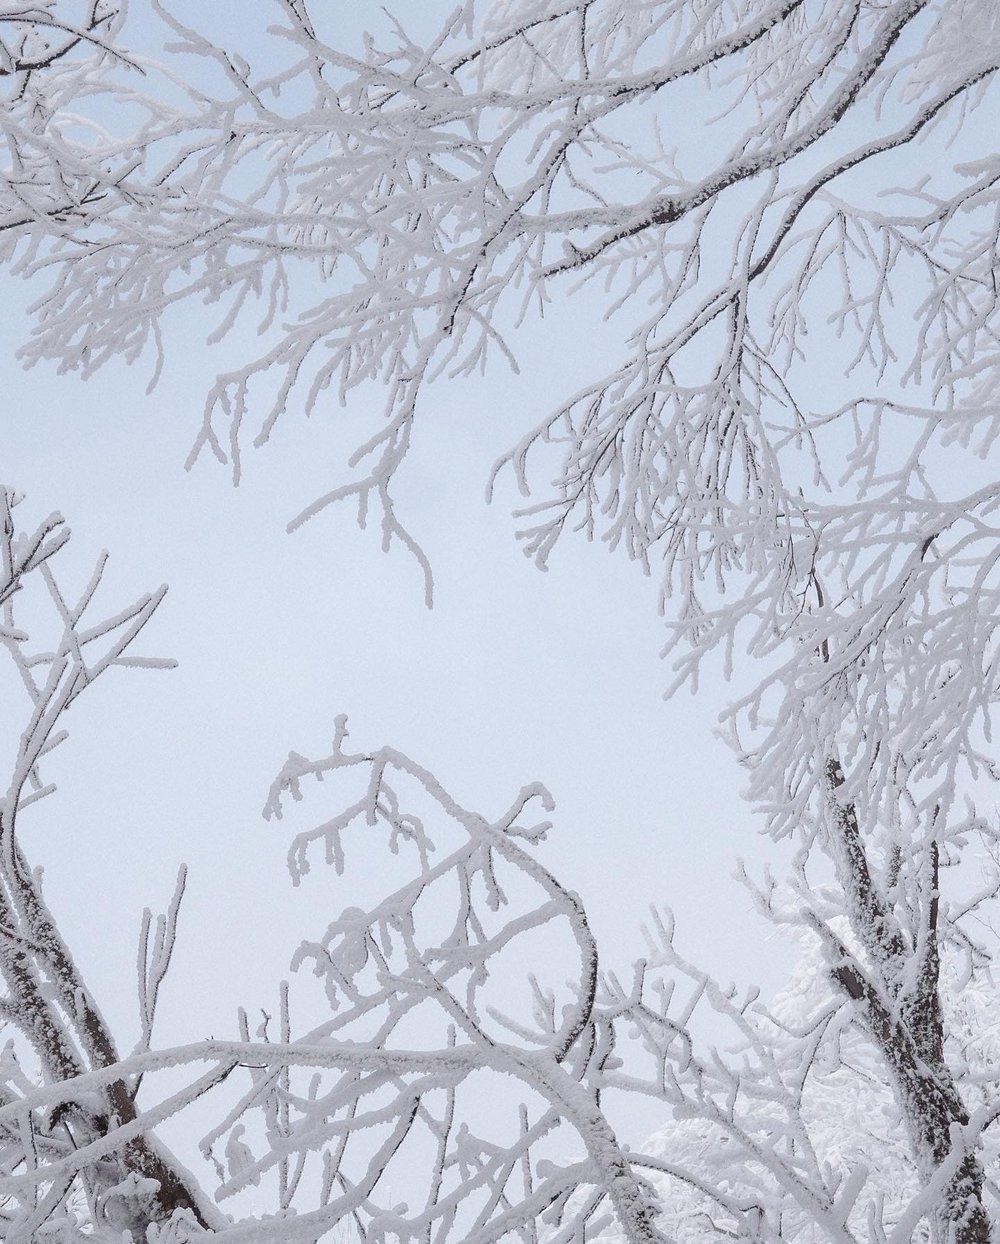 Fresh snow on tree branches - Mont Sutton - Eastern Townships - Quebec - Canada